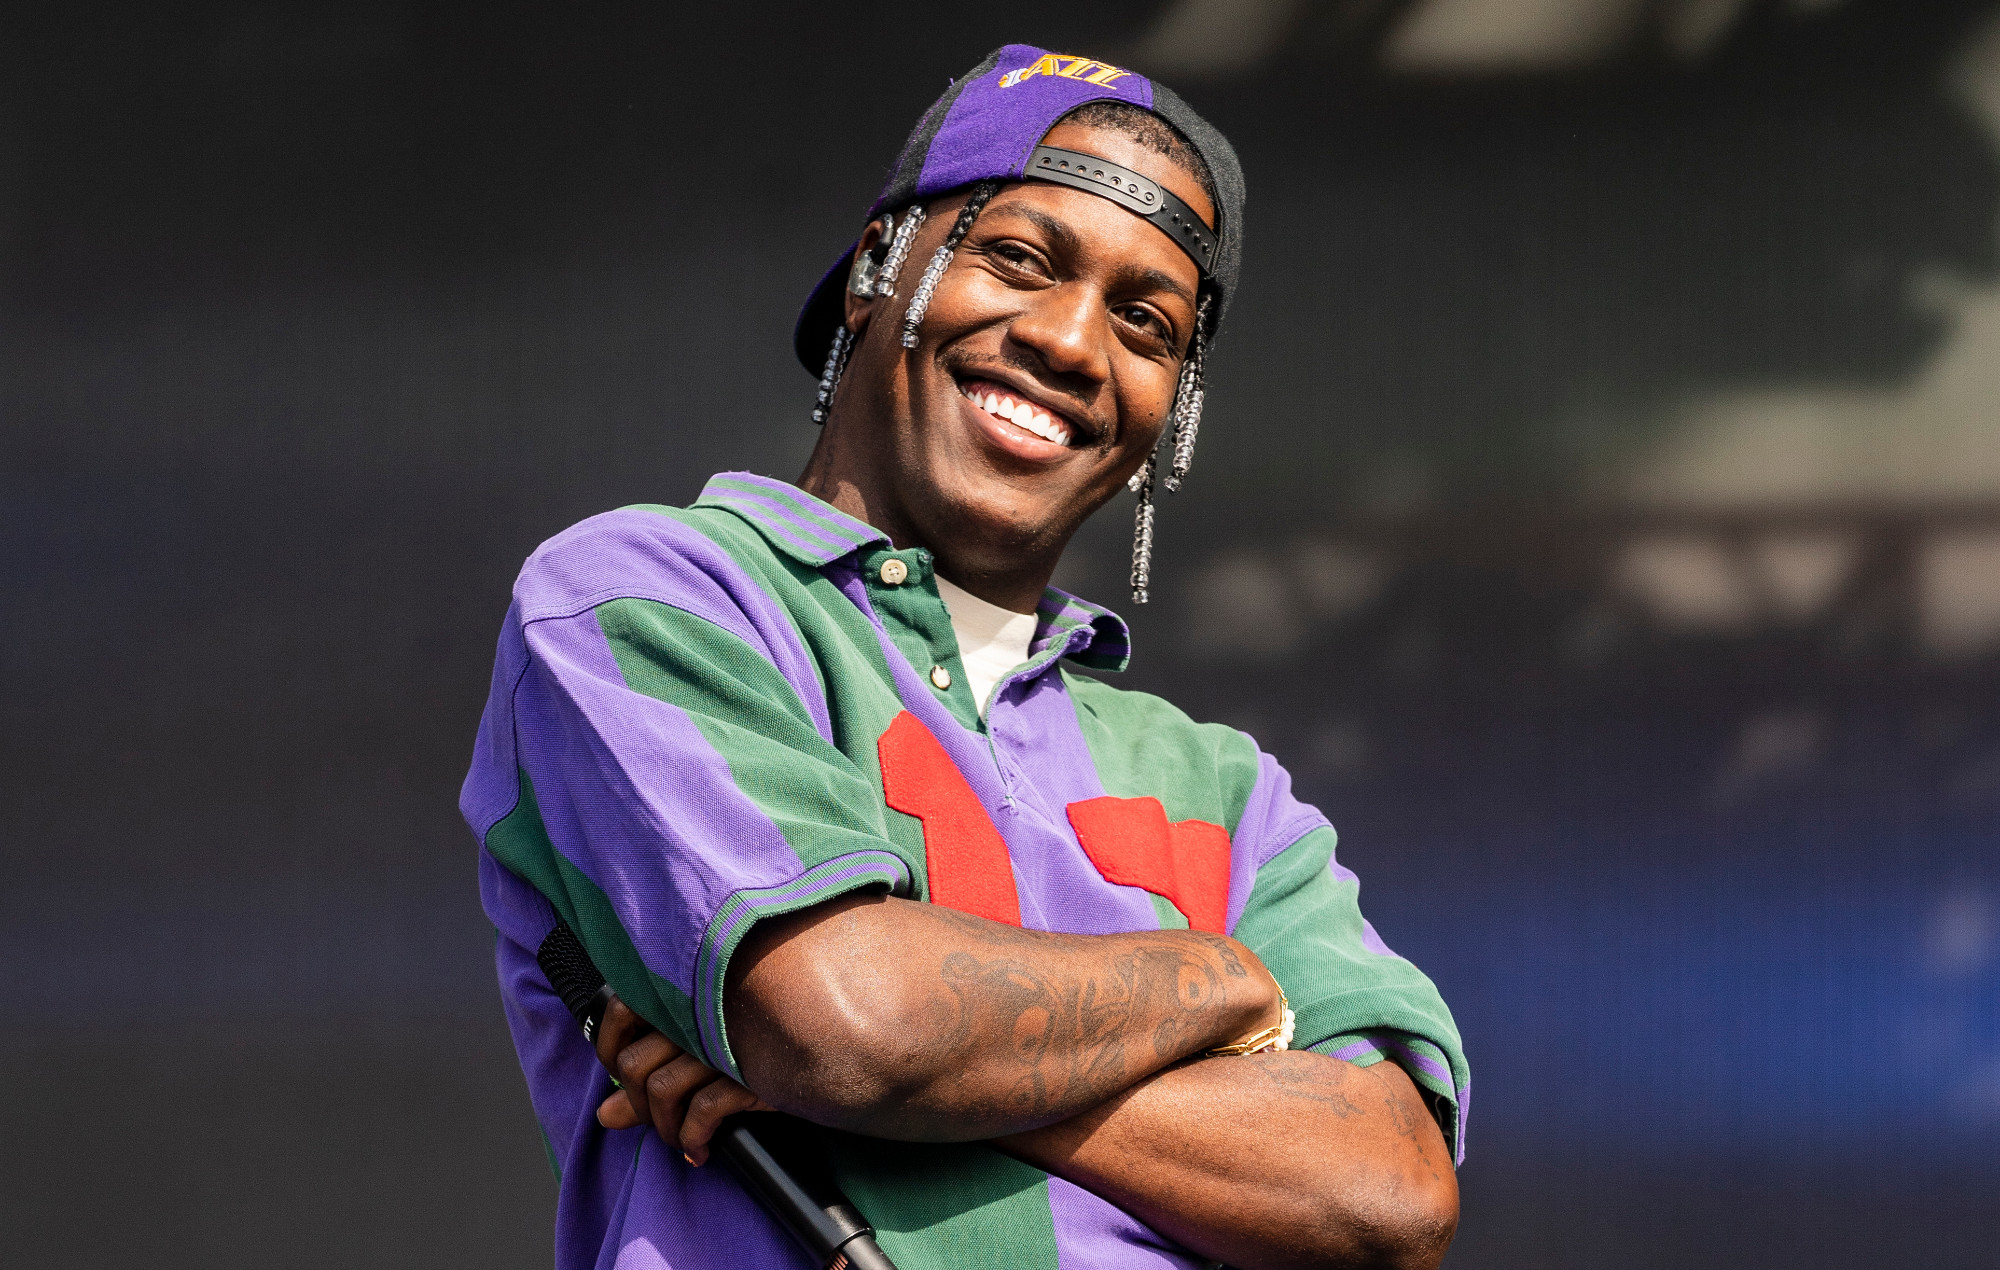 Lil Yachty says Twitch streamers make “more money” than “90 per cent of rappers”